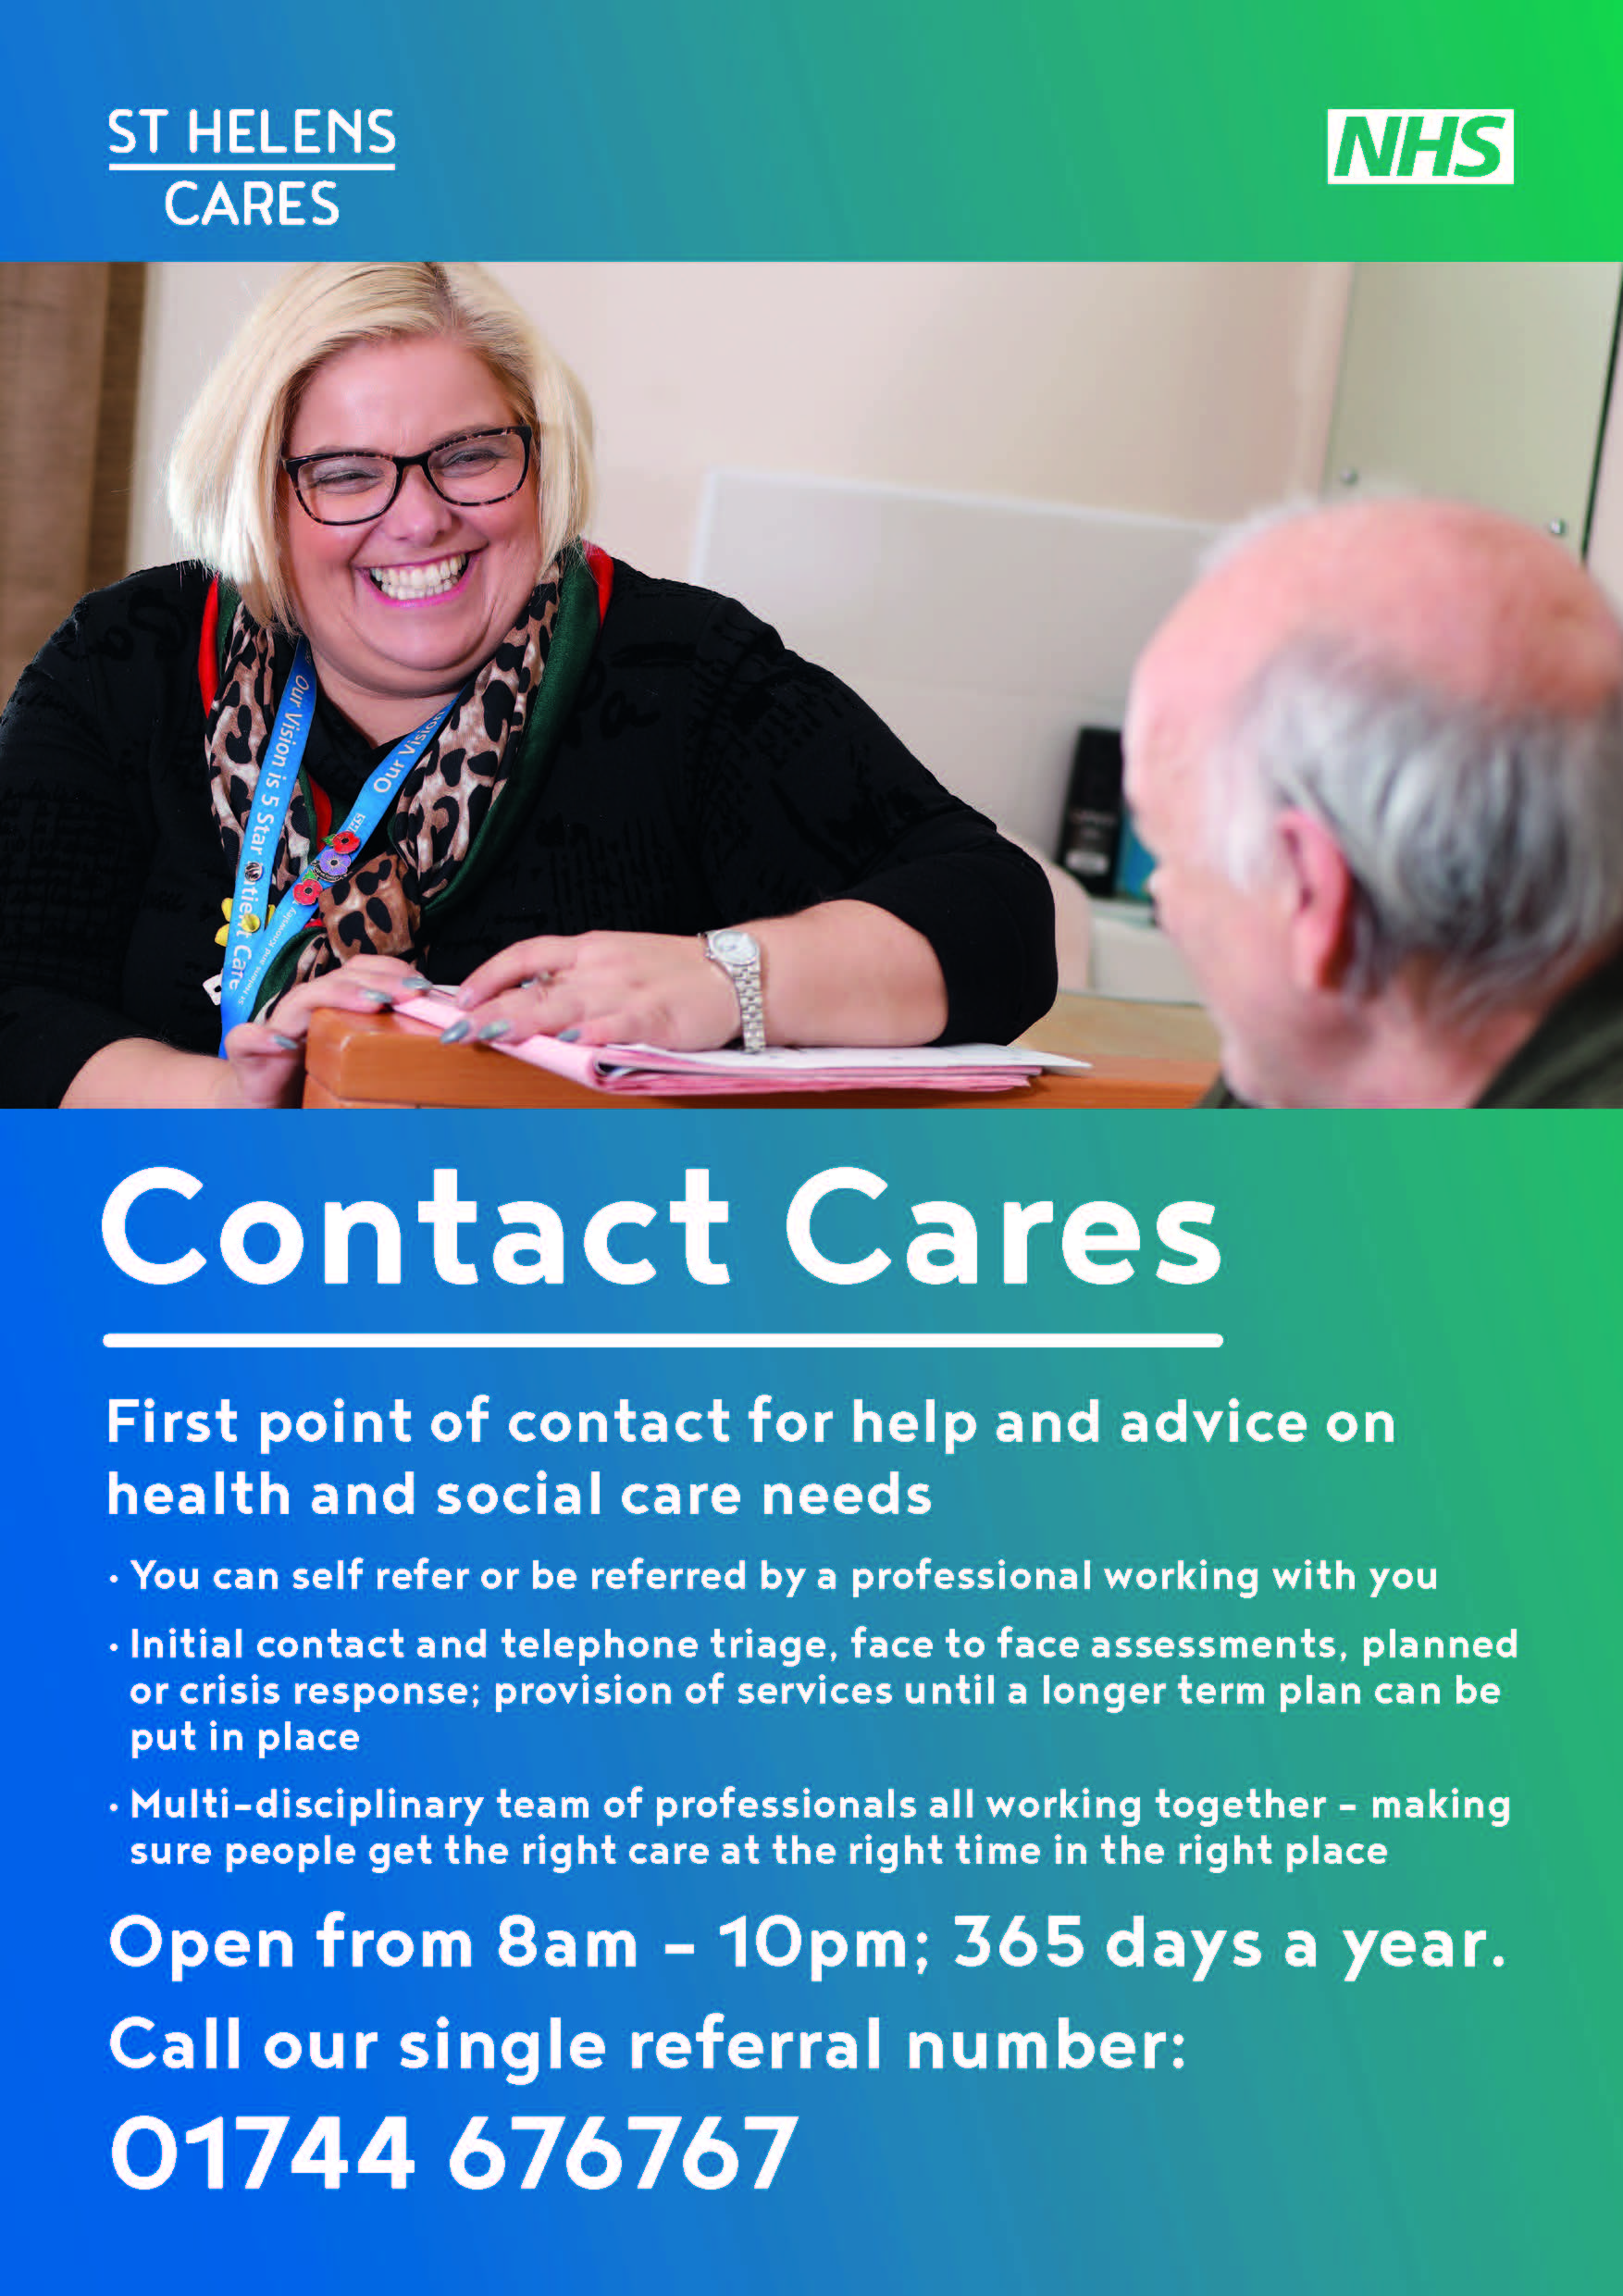 St Helens Contact Cares films show how the integrated service is making a real difference to residents lives featured image